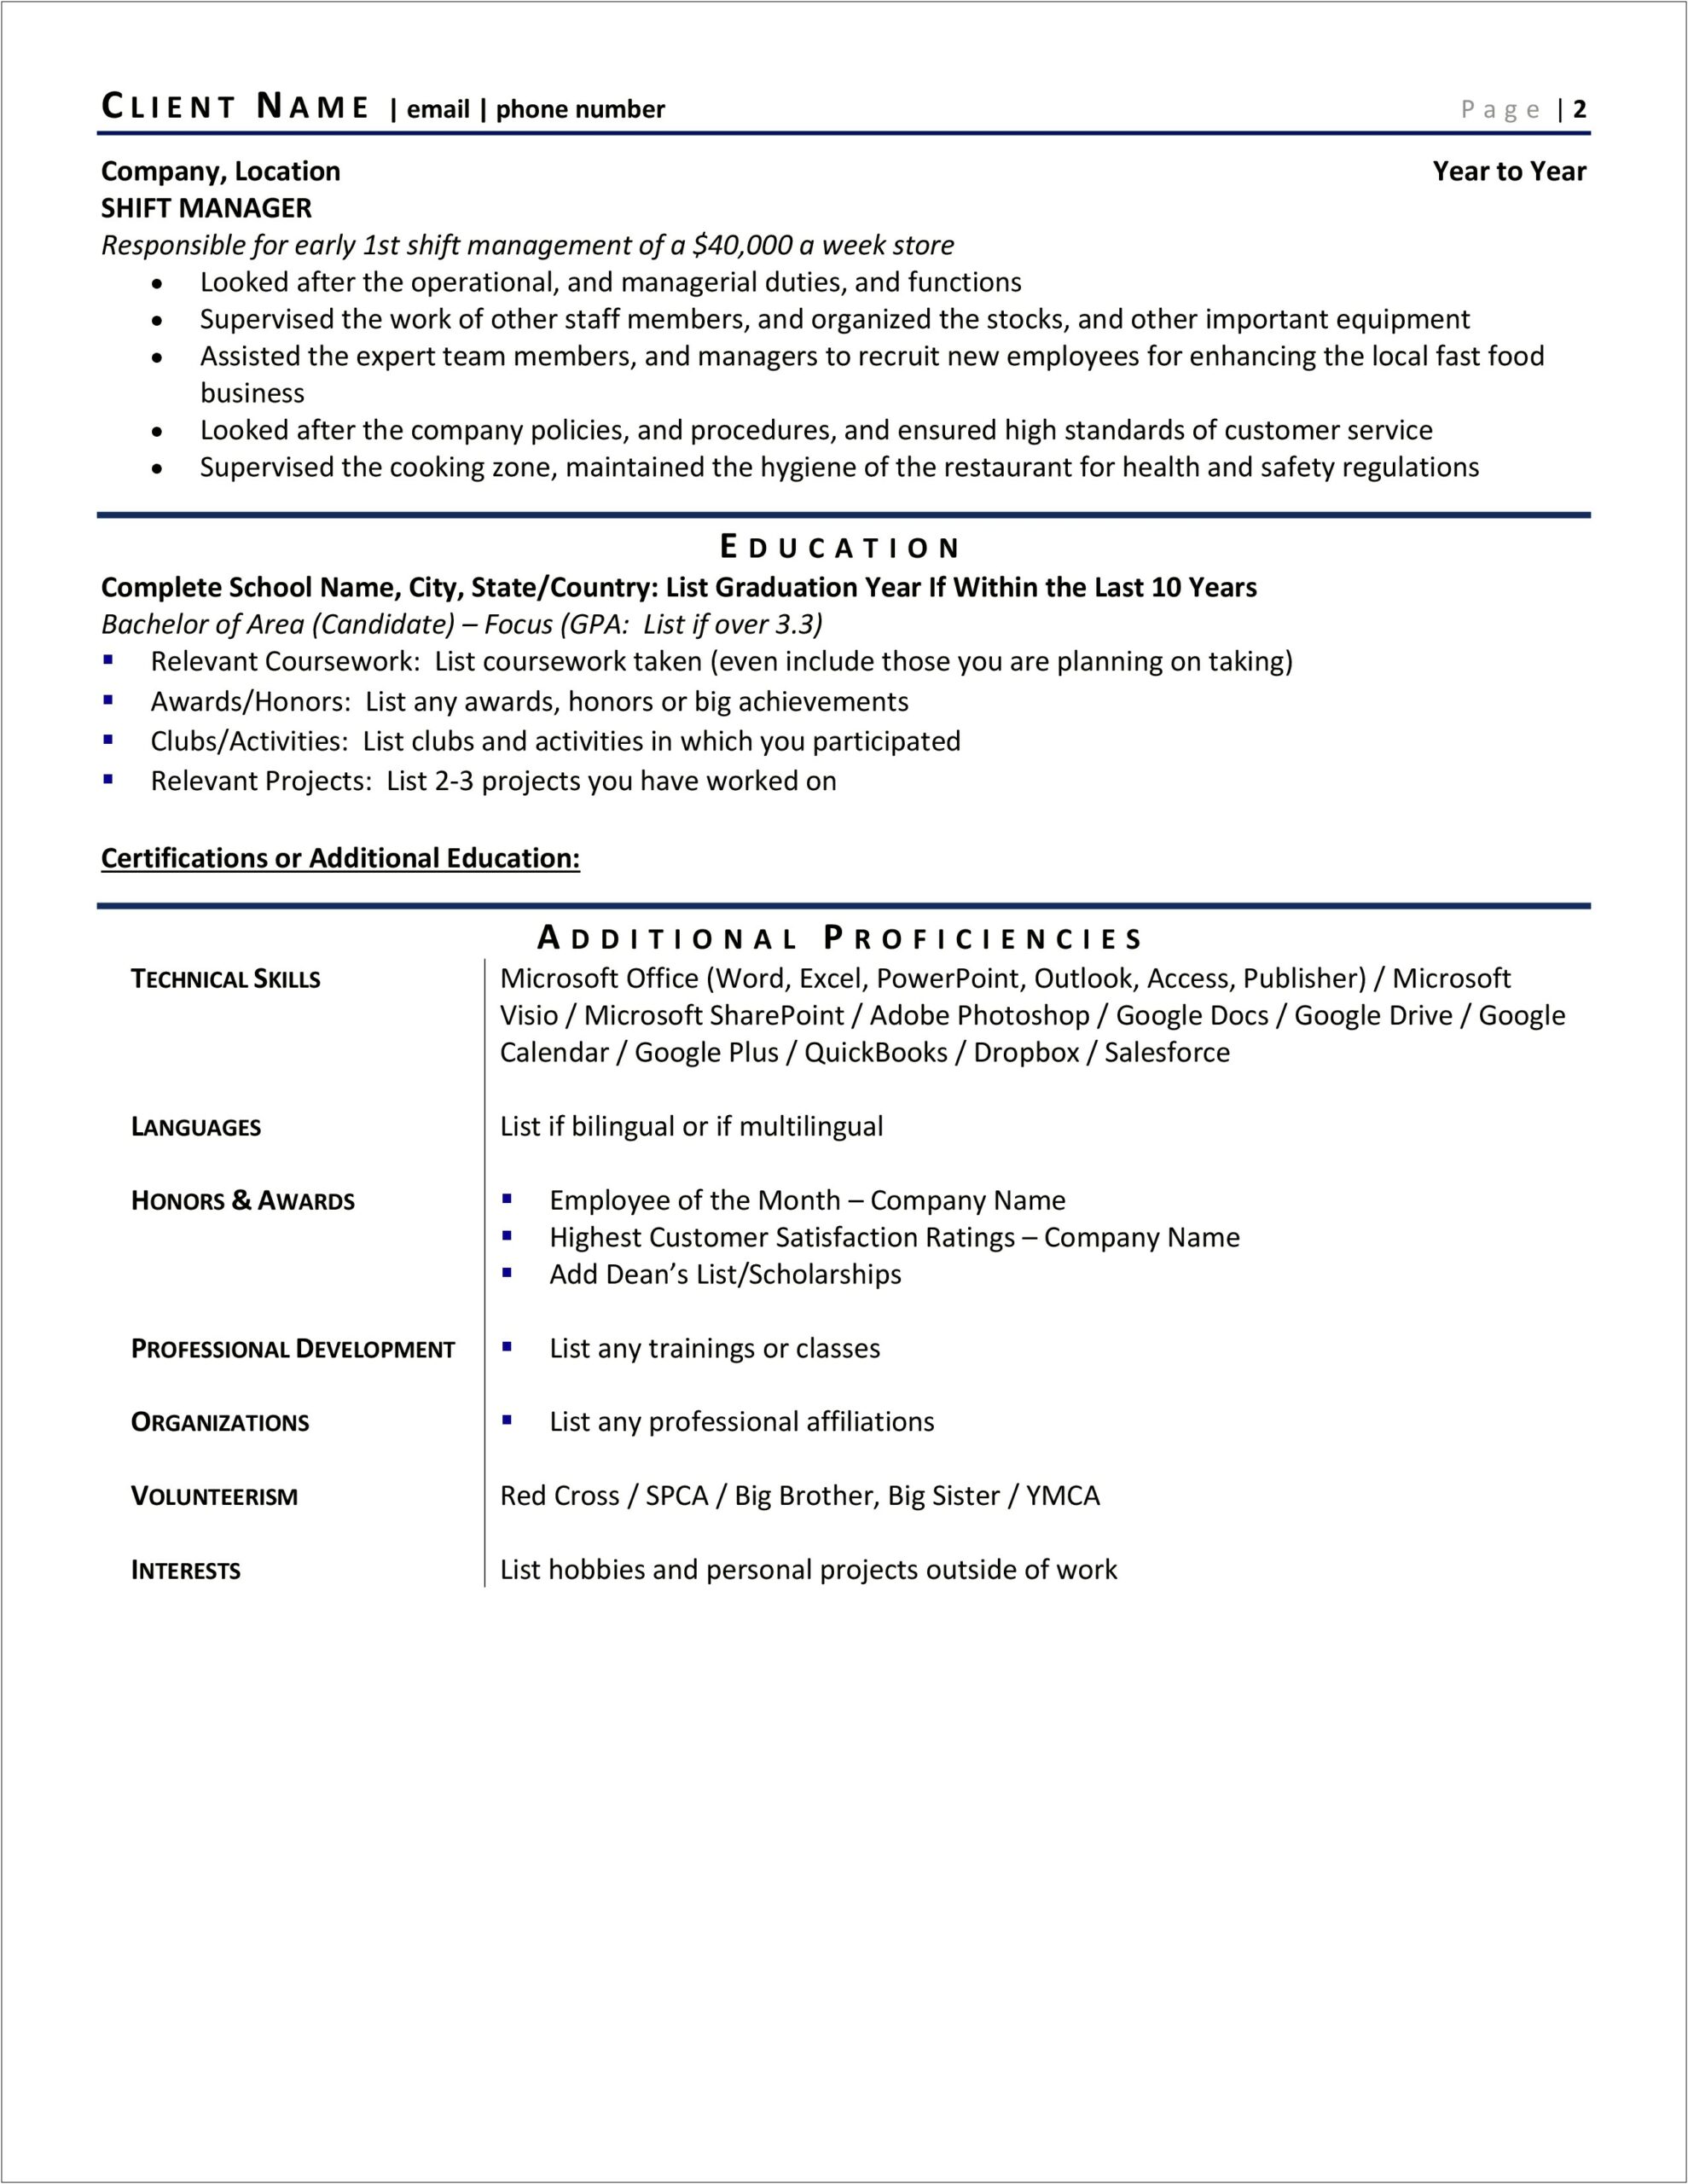 Job Site Says Resume Is Too Small